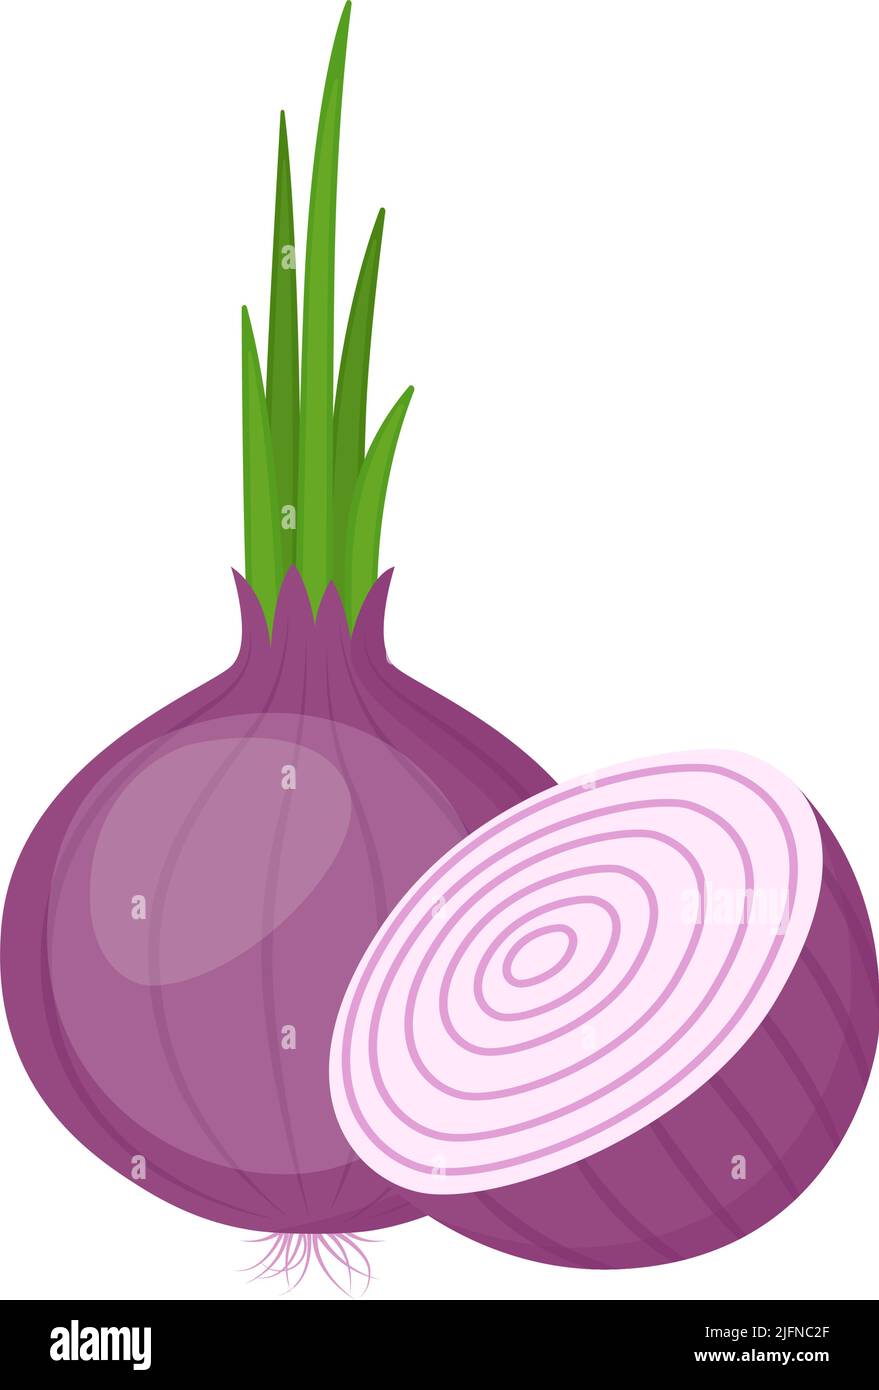 Red onion, whole and cut. Organic farm vegetable, vector illustration Stock Vector